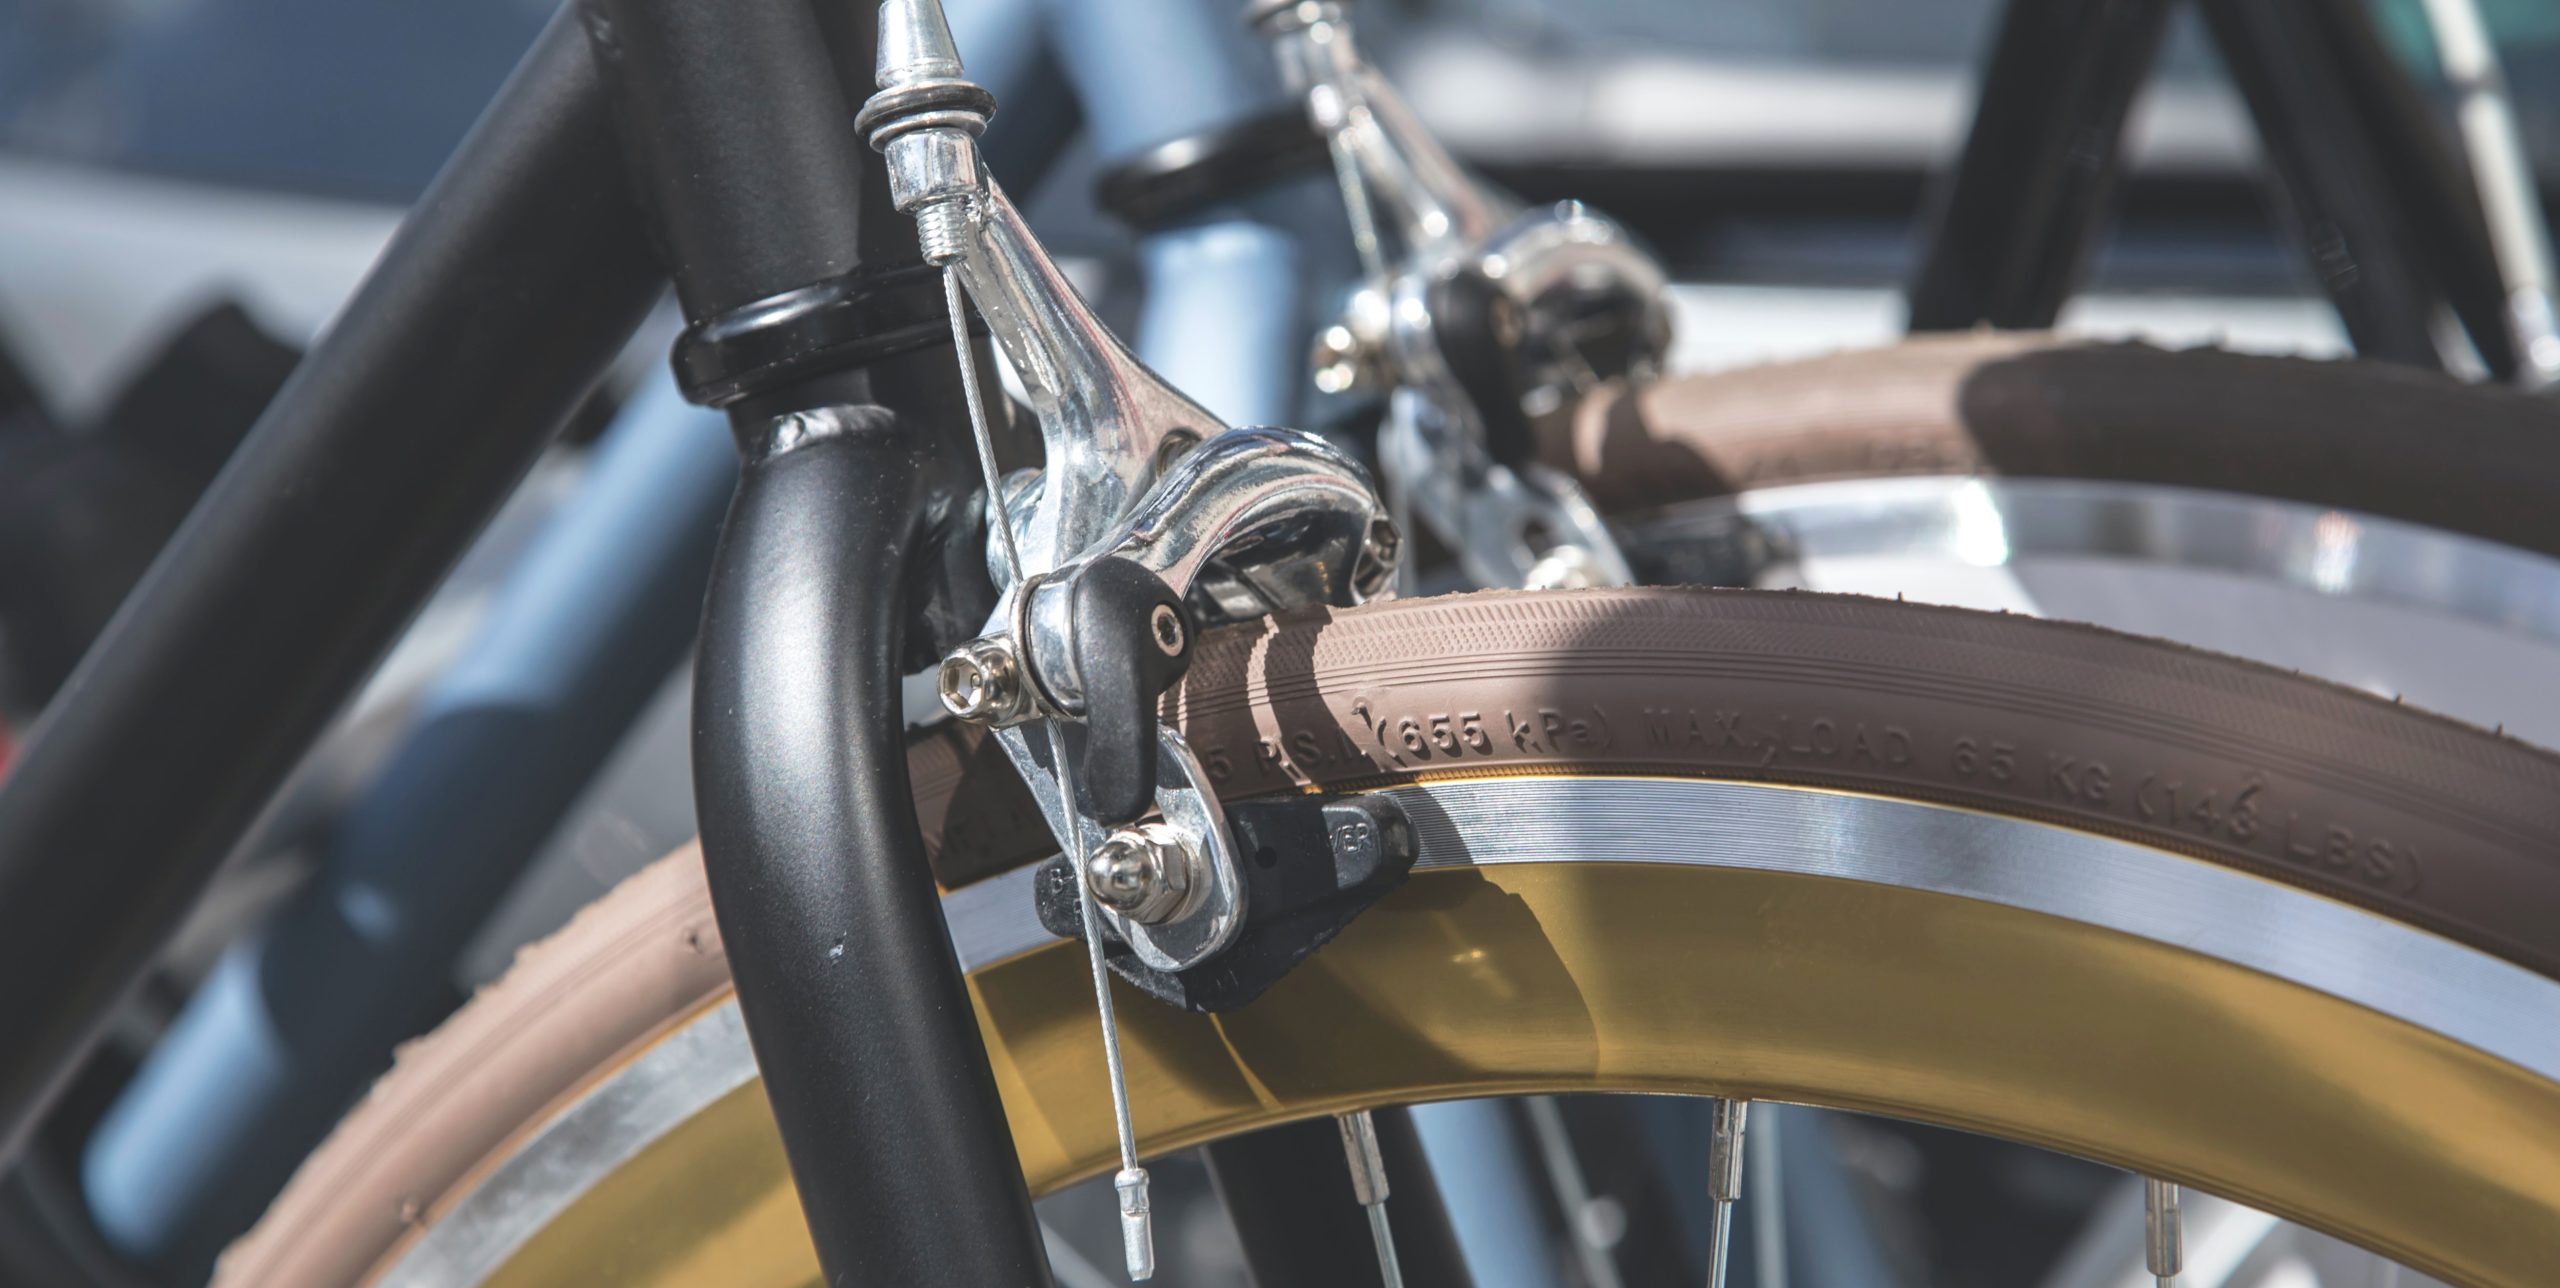 Local Bike Shop Professional Mechanic Corey Burtell breaks down the basics of bicycle maintenance to minimize wear and maximize speed for your next race.